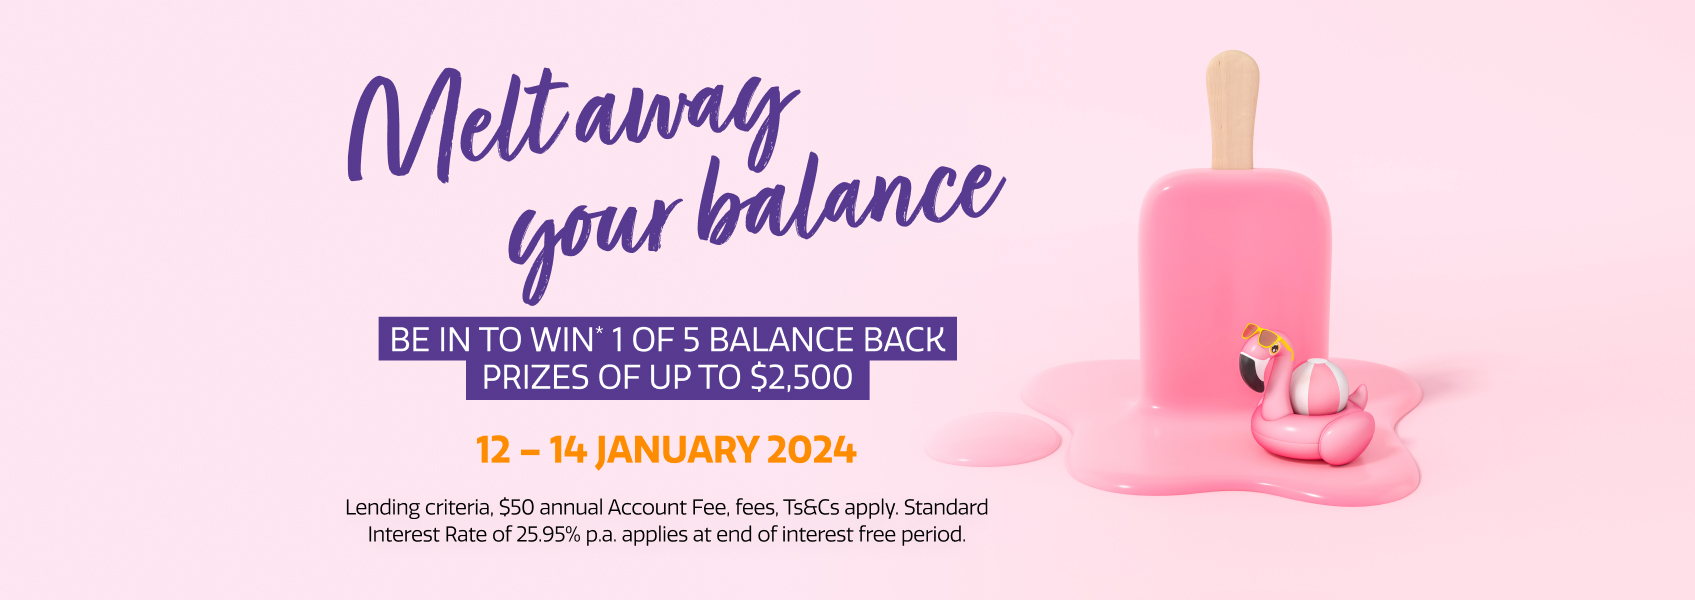 Double** chances to win* your balance back, up to $2,500 